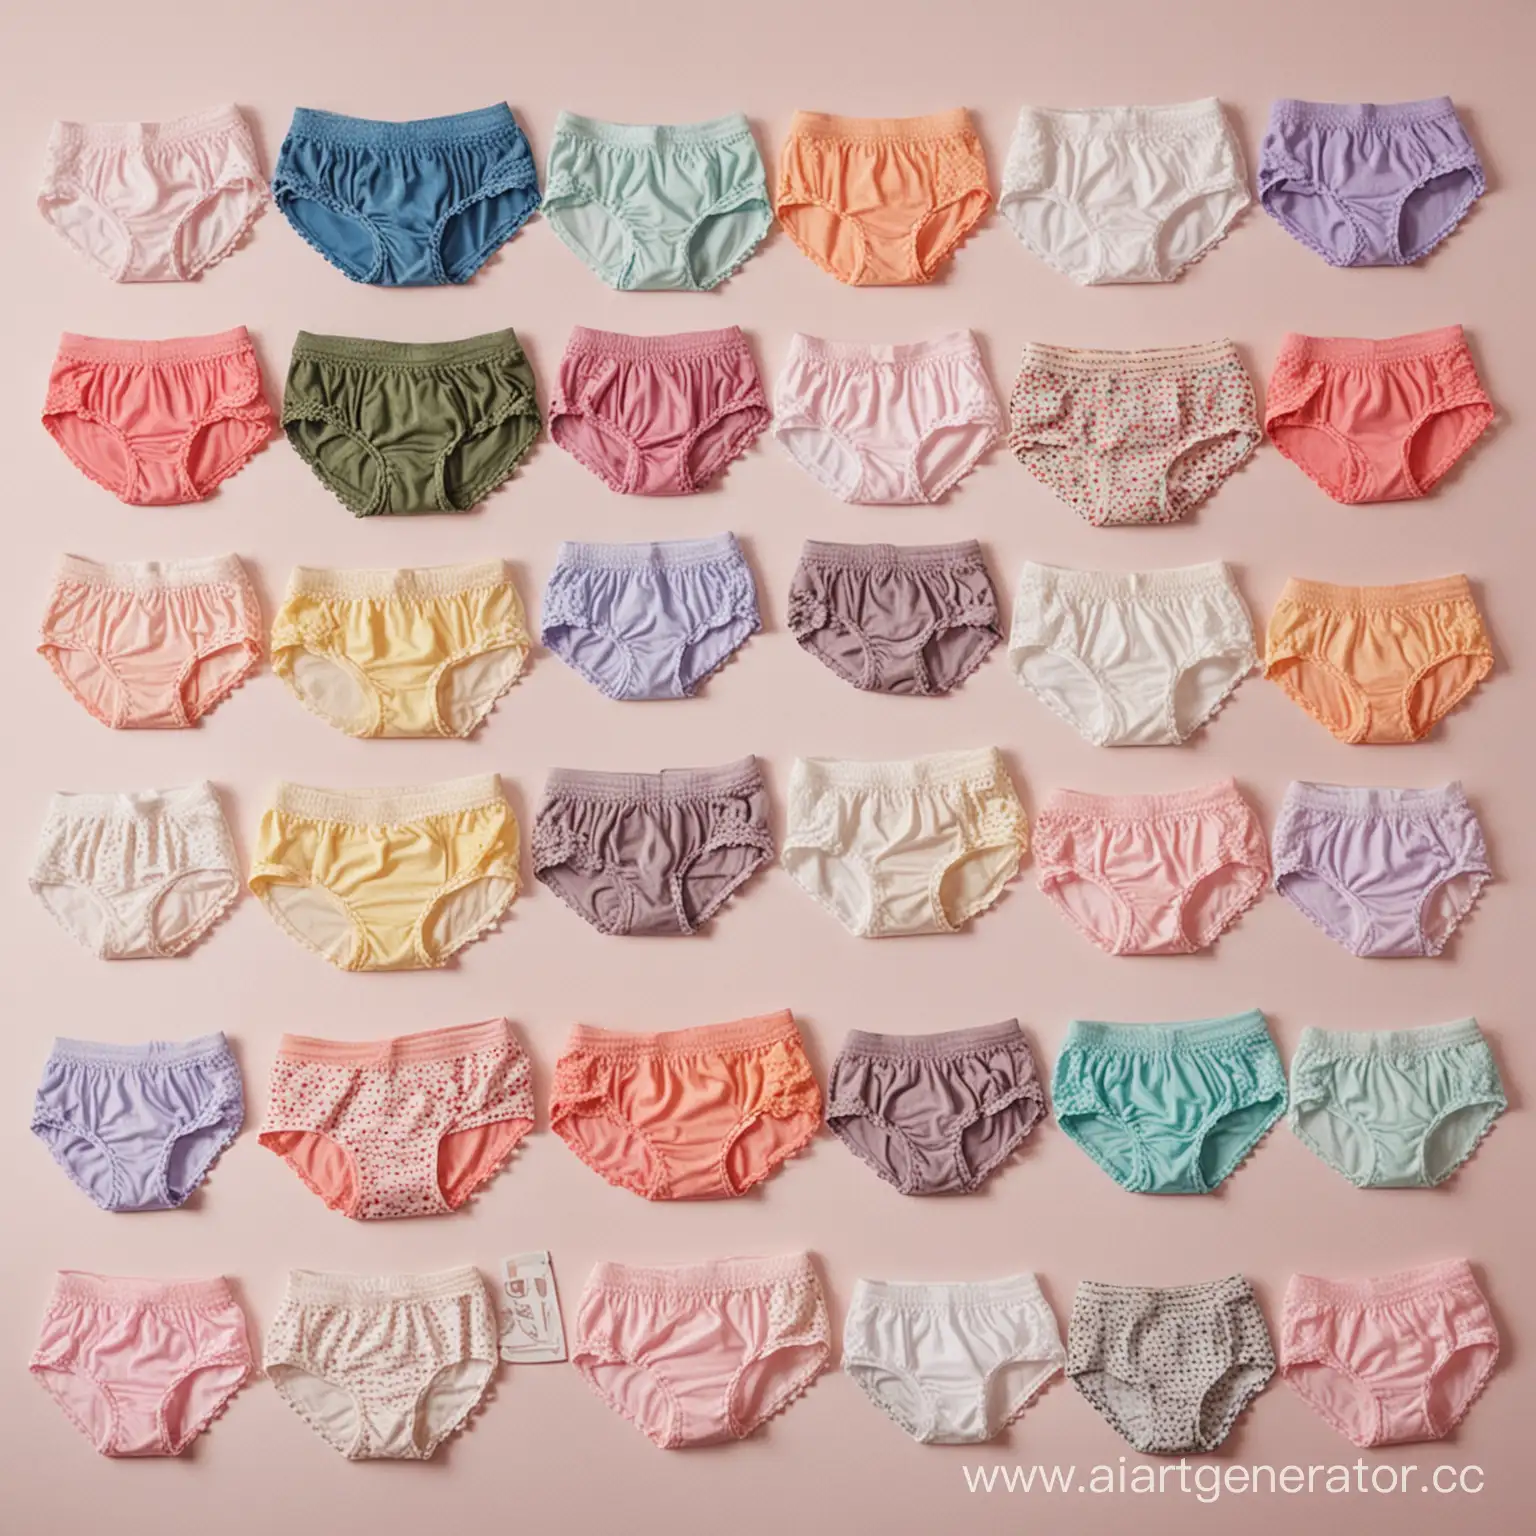 20 panties of different types, styles and colors lie on the same background